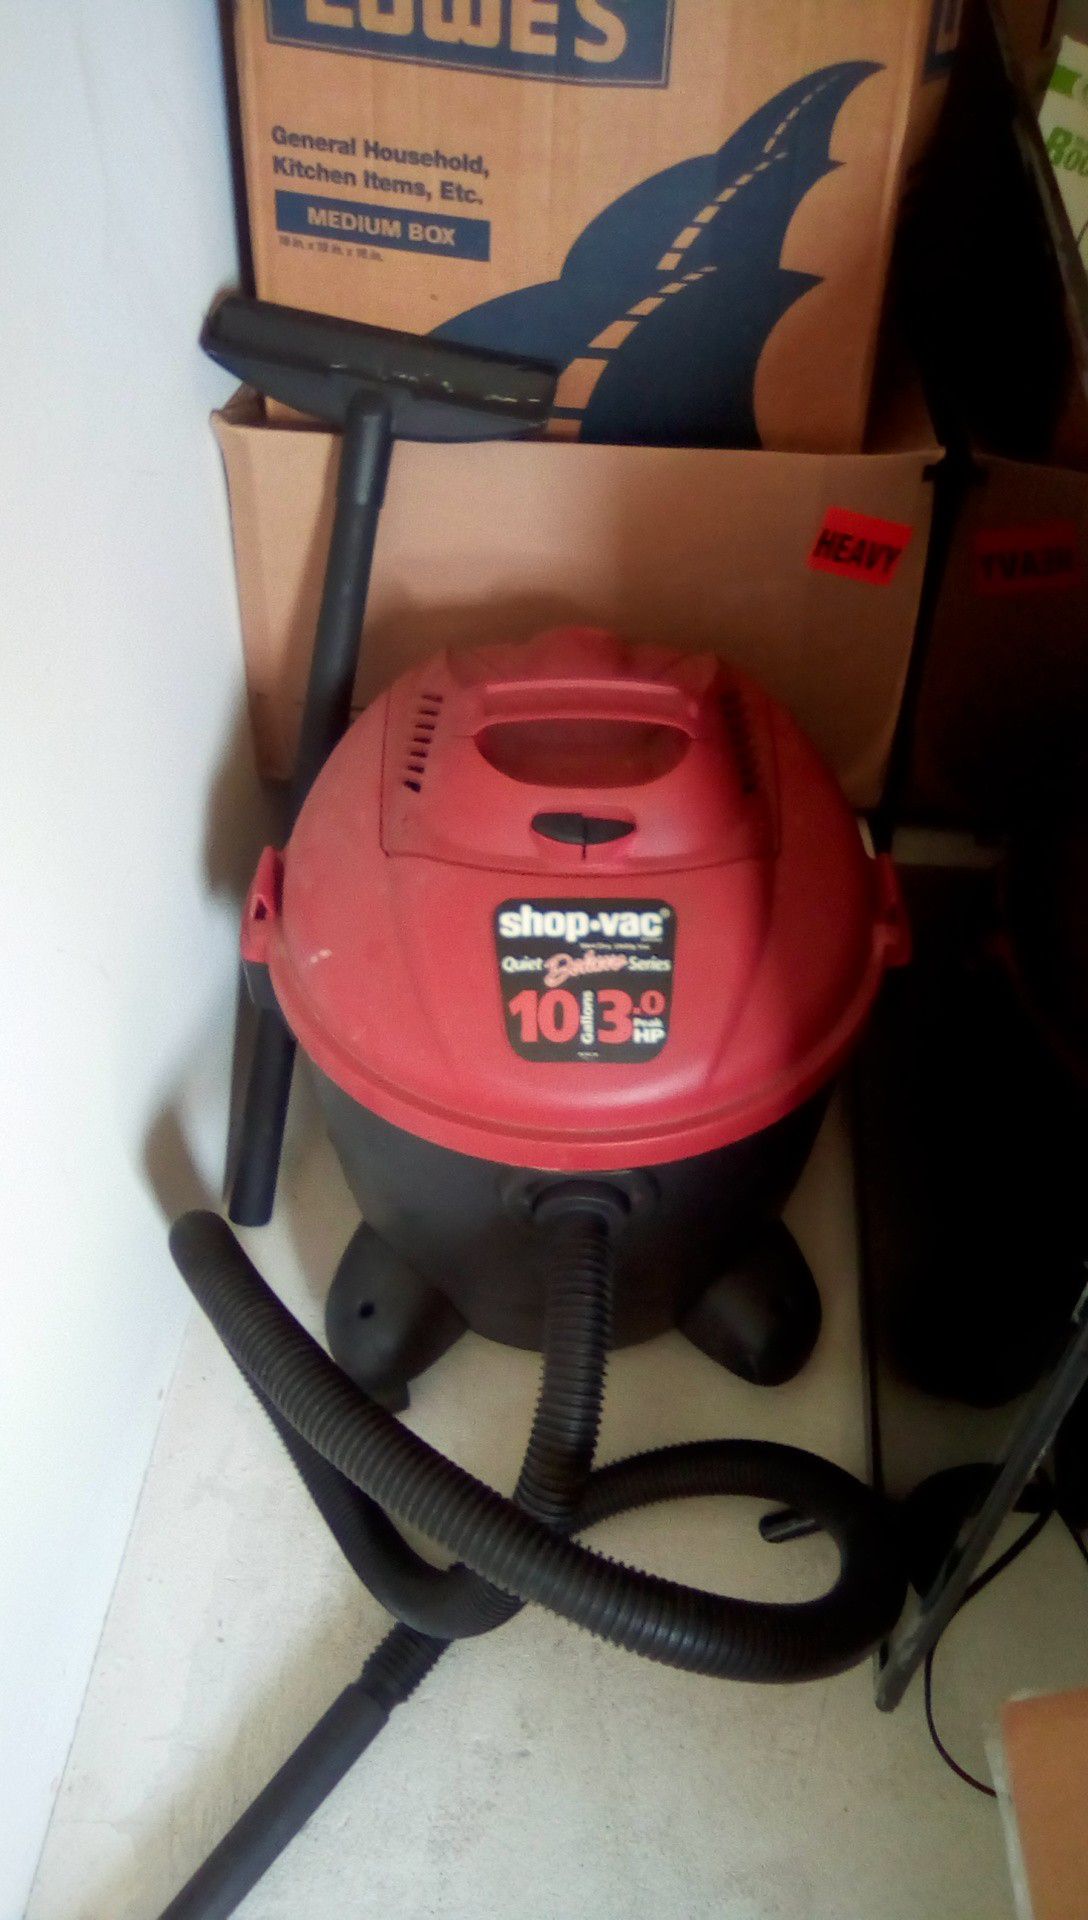 Shop vac quite deluxe series. 10 g and 3.0 peak hp